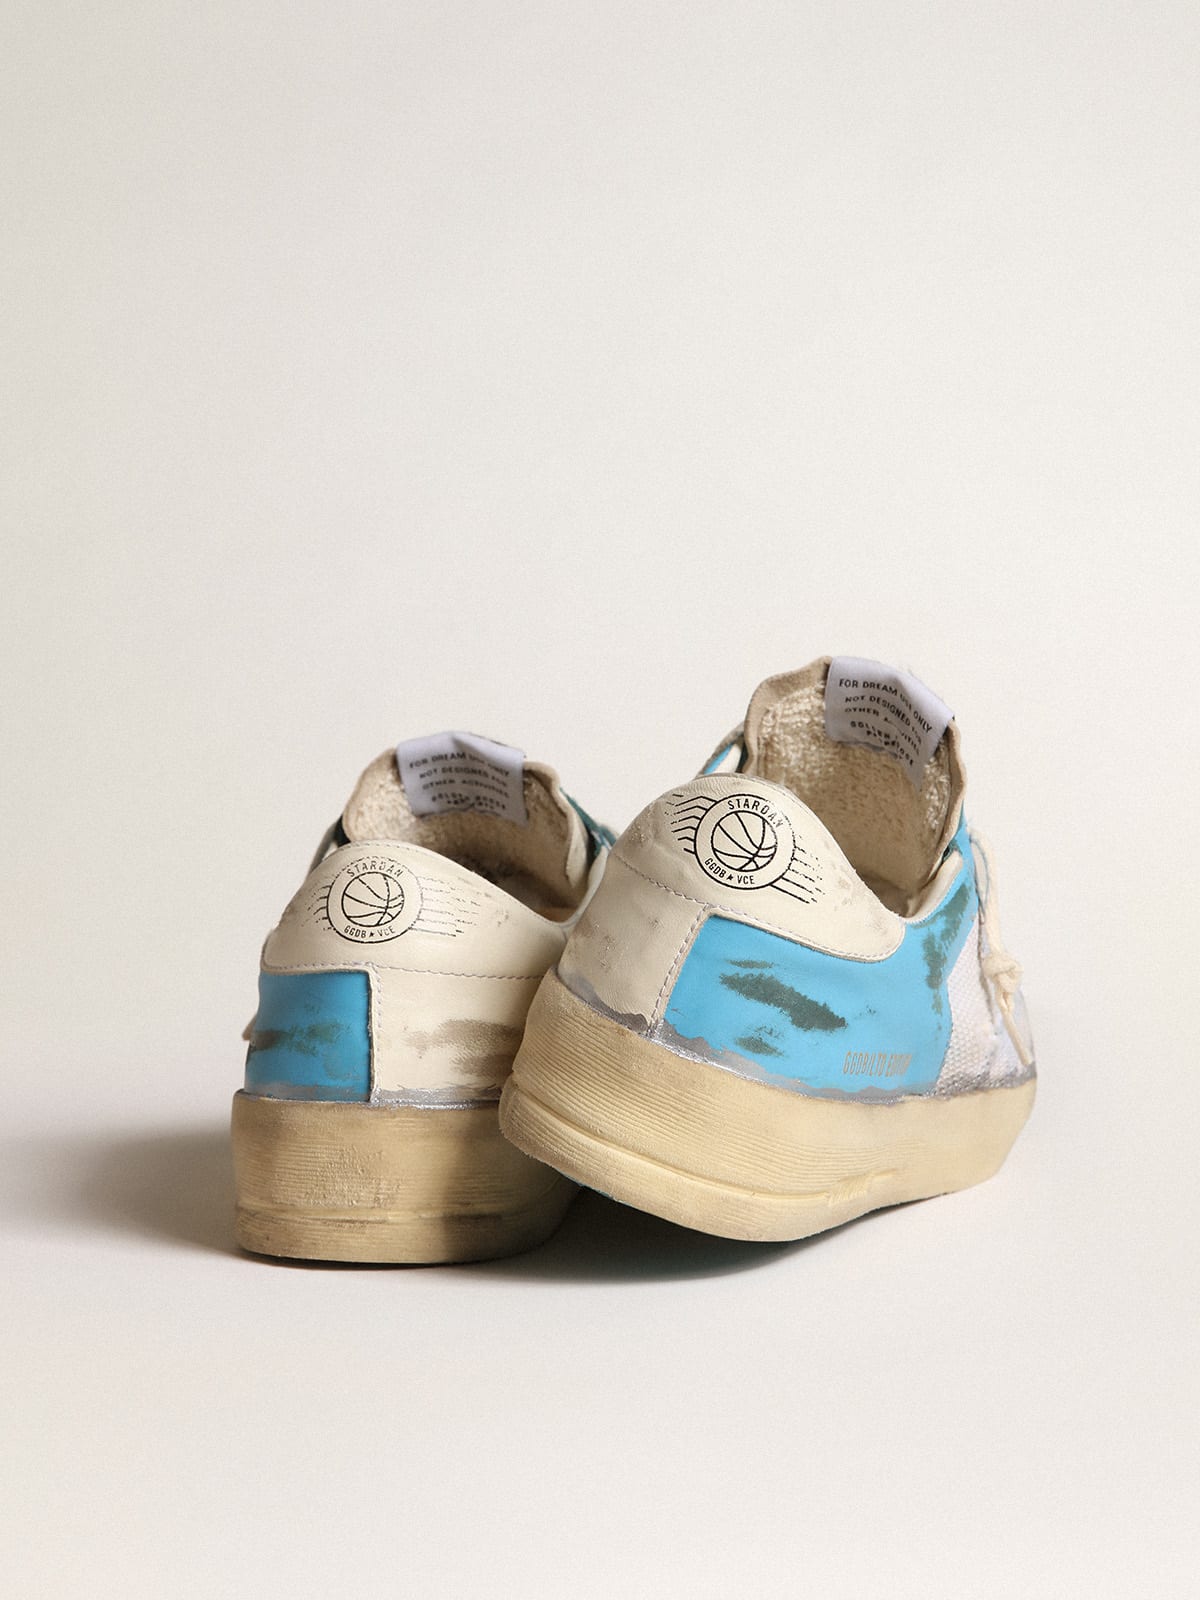 Golden Goose - Men's Stardan LAB in light blue nappa leather and white mesh in 